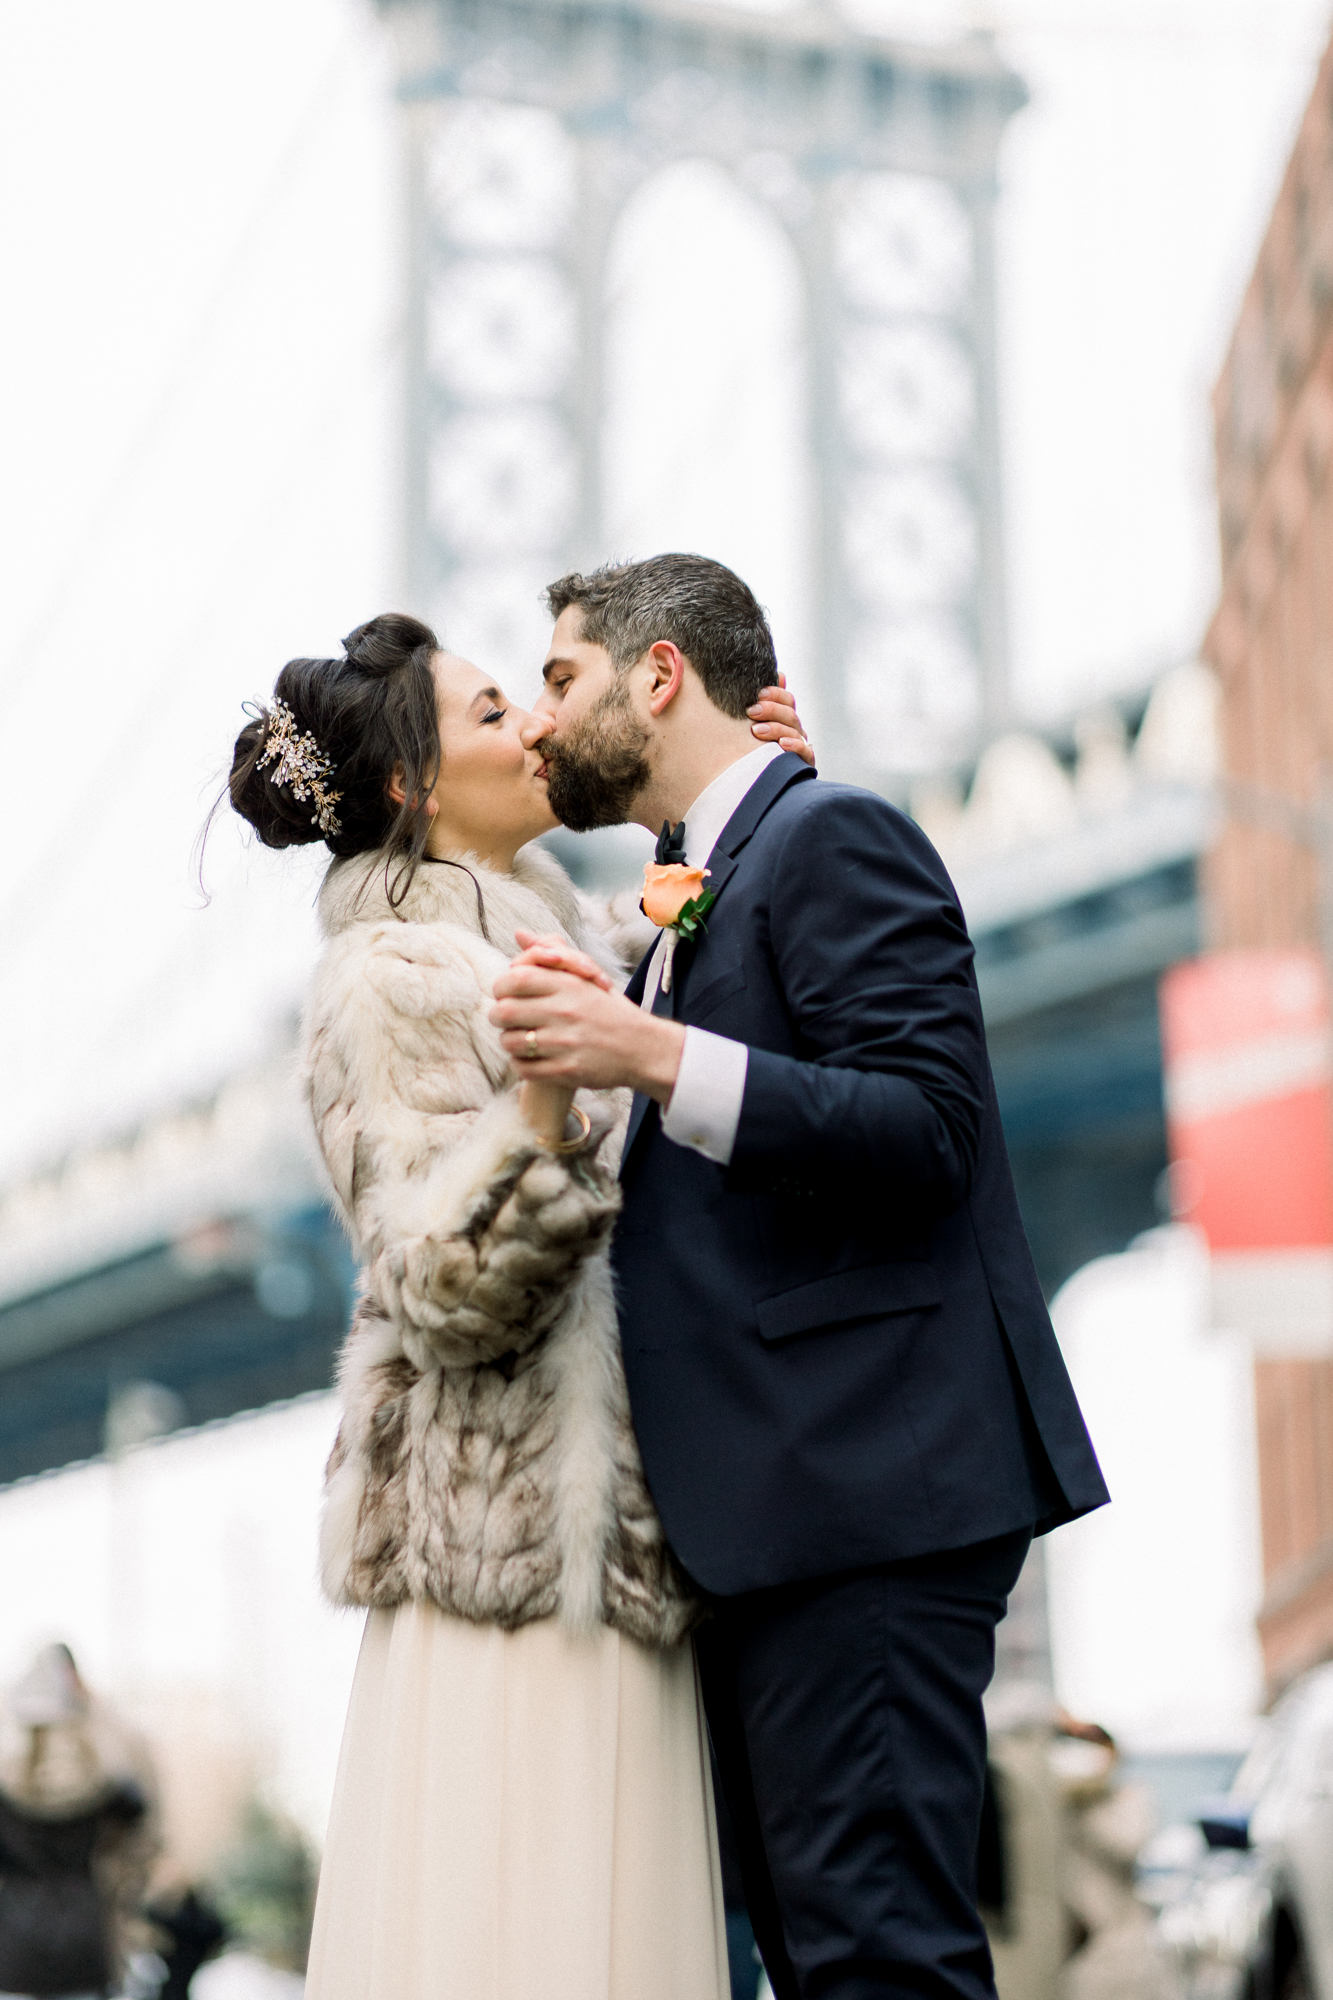 Affordable NYC Event Venues for Winter Weddings